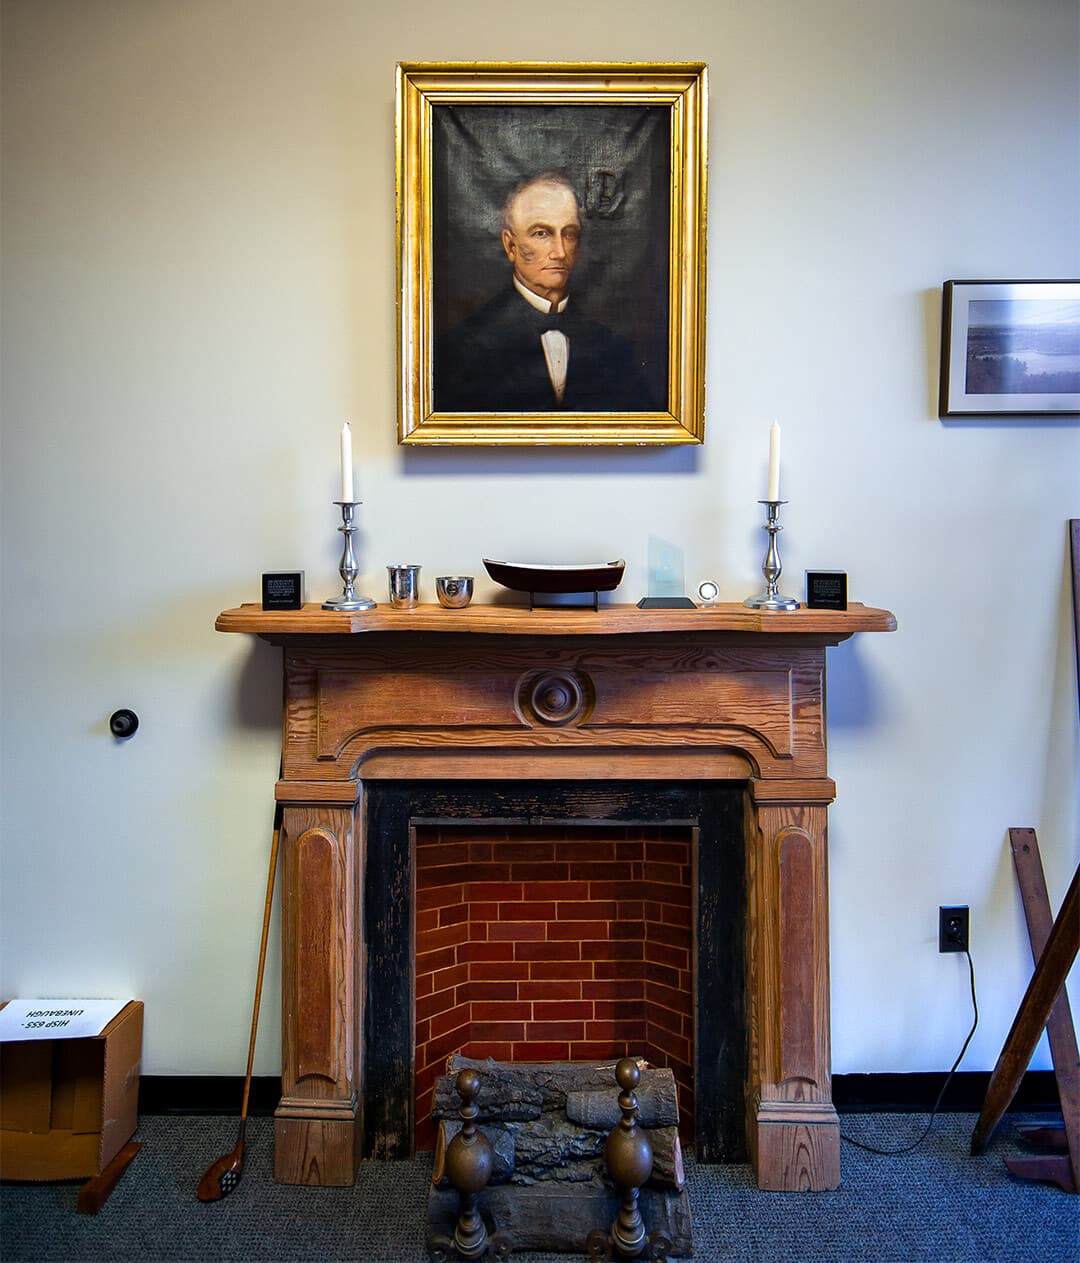 Mantel with portrait hanging above it